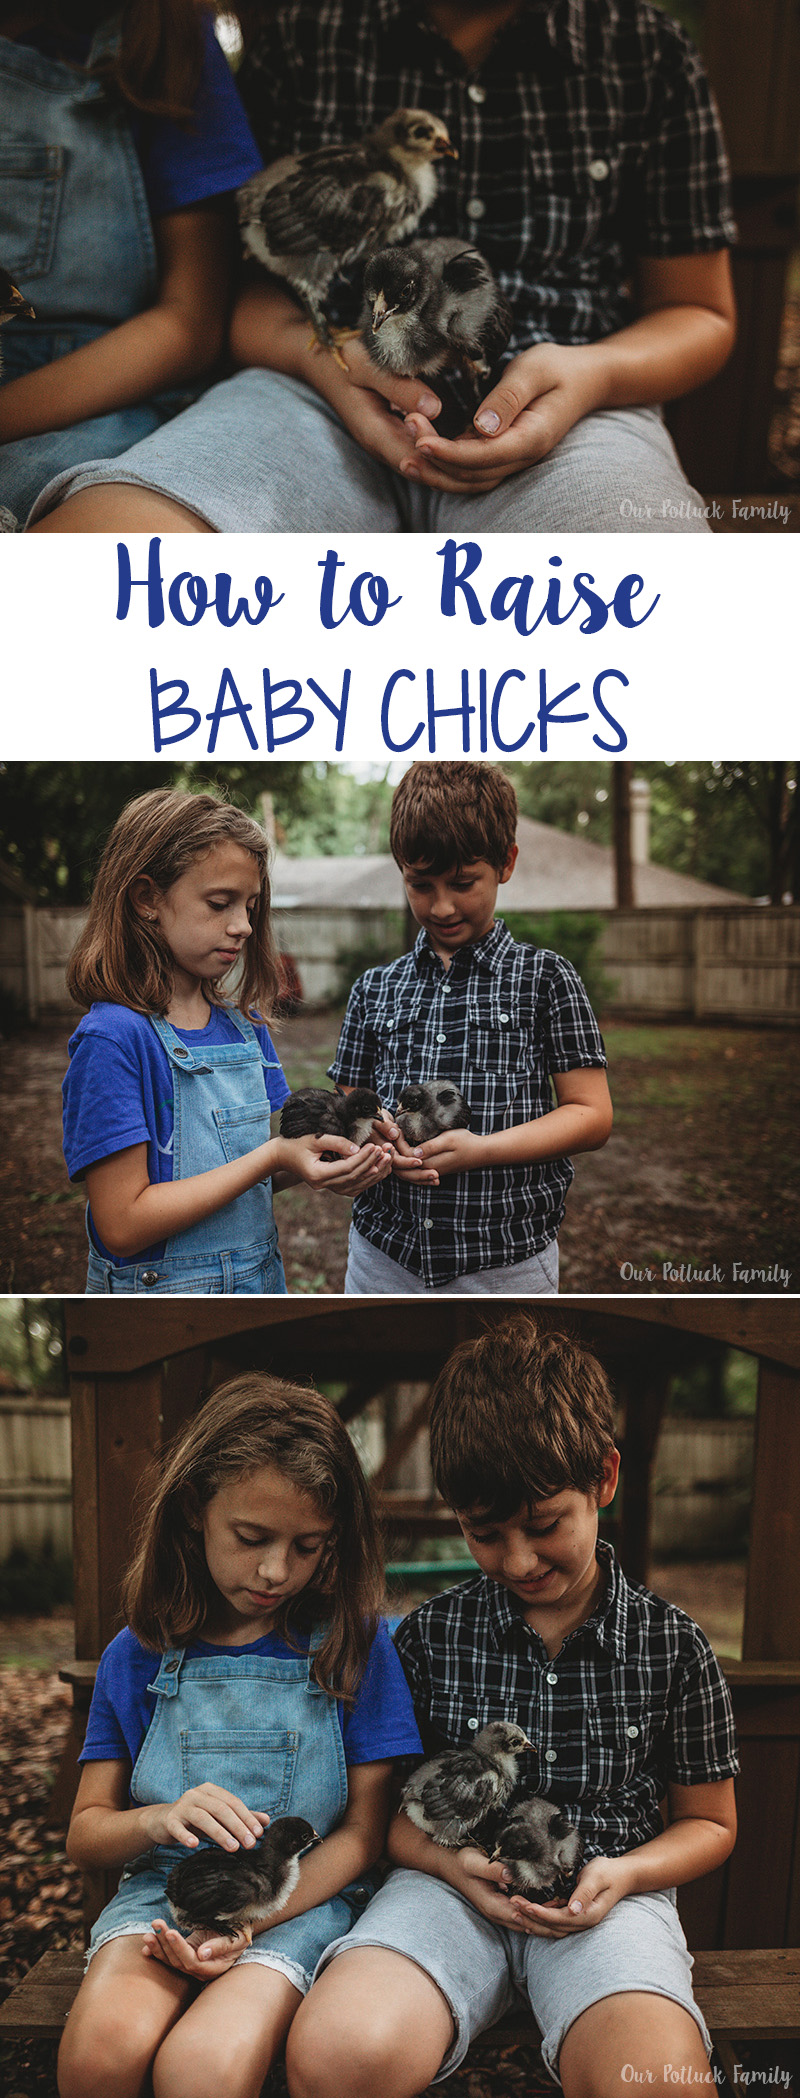 How to Raise Baby Chicks